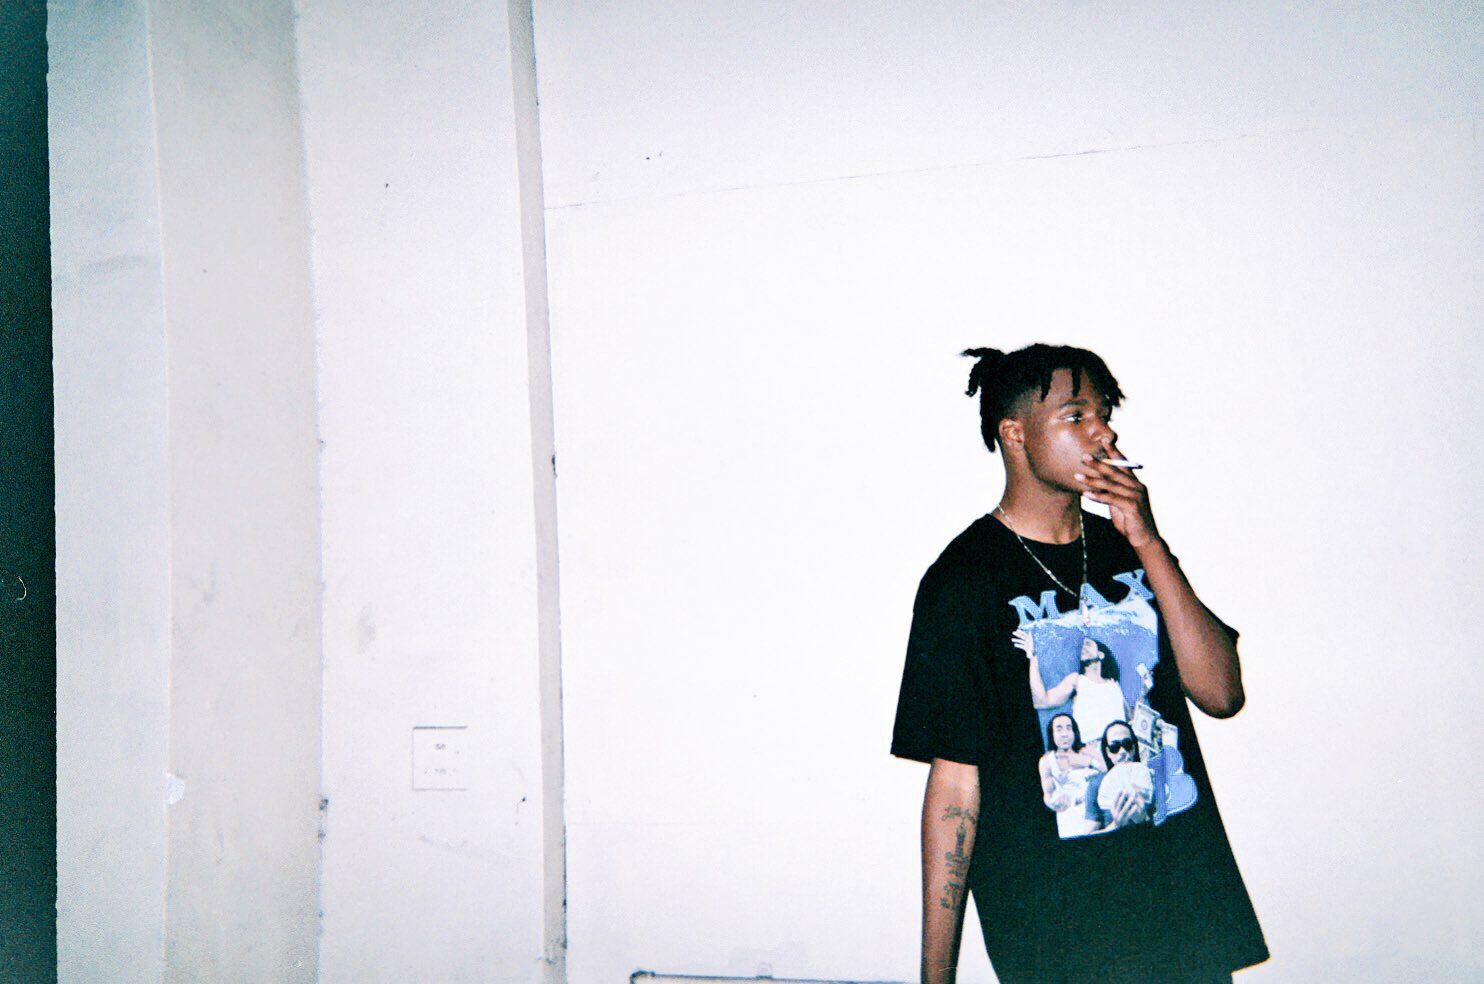 Ghoulavelii’s Dark, Punk-Infused Trap Epitomizes the New T-Town Sound